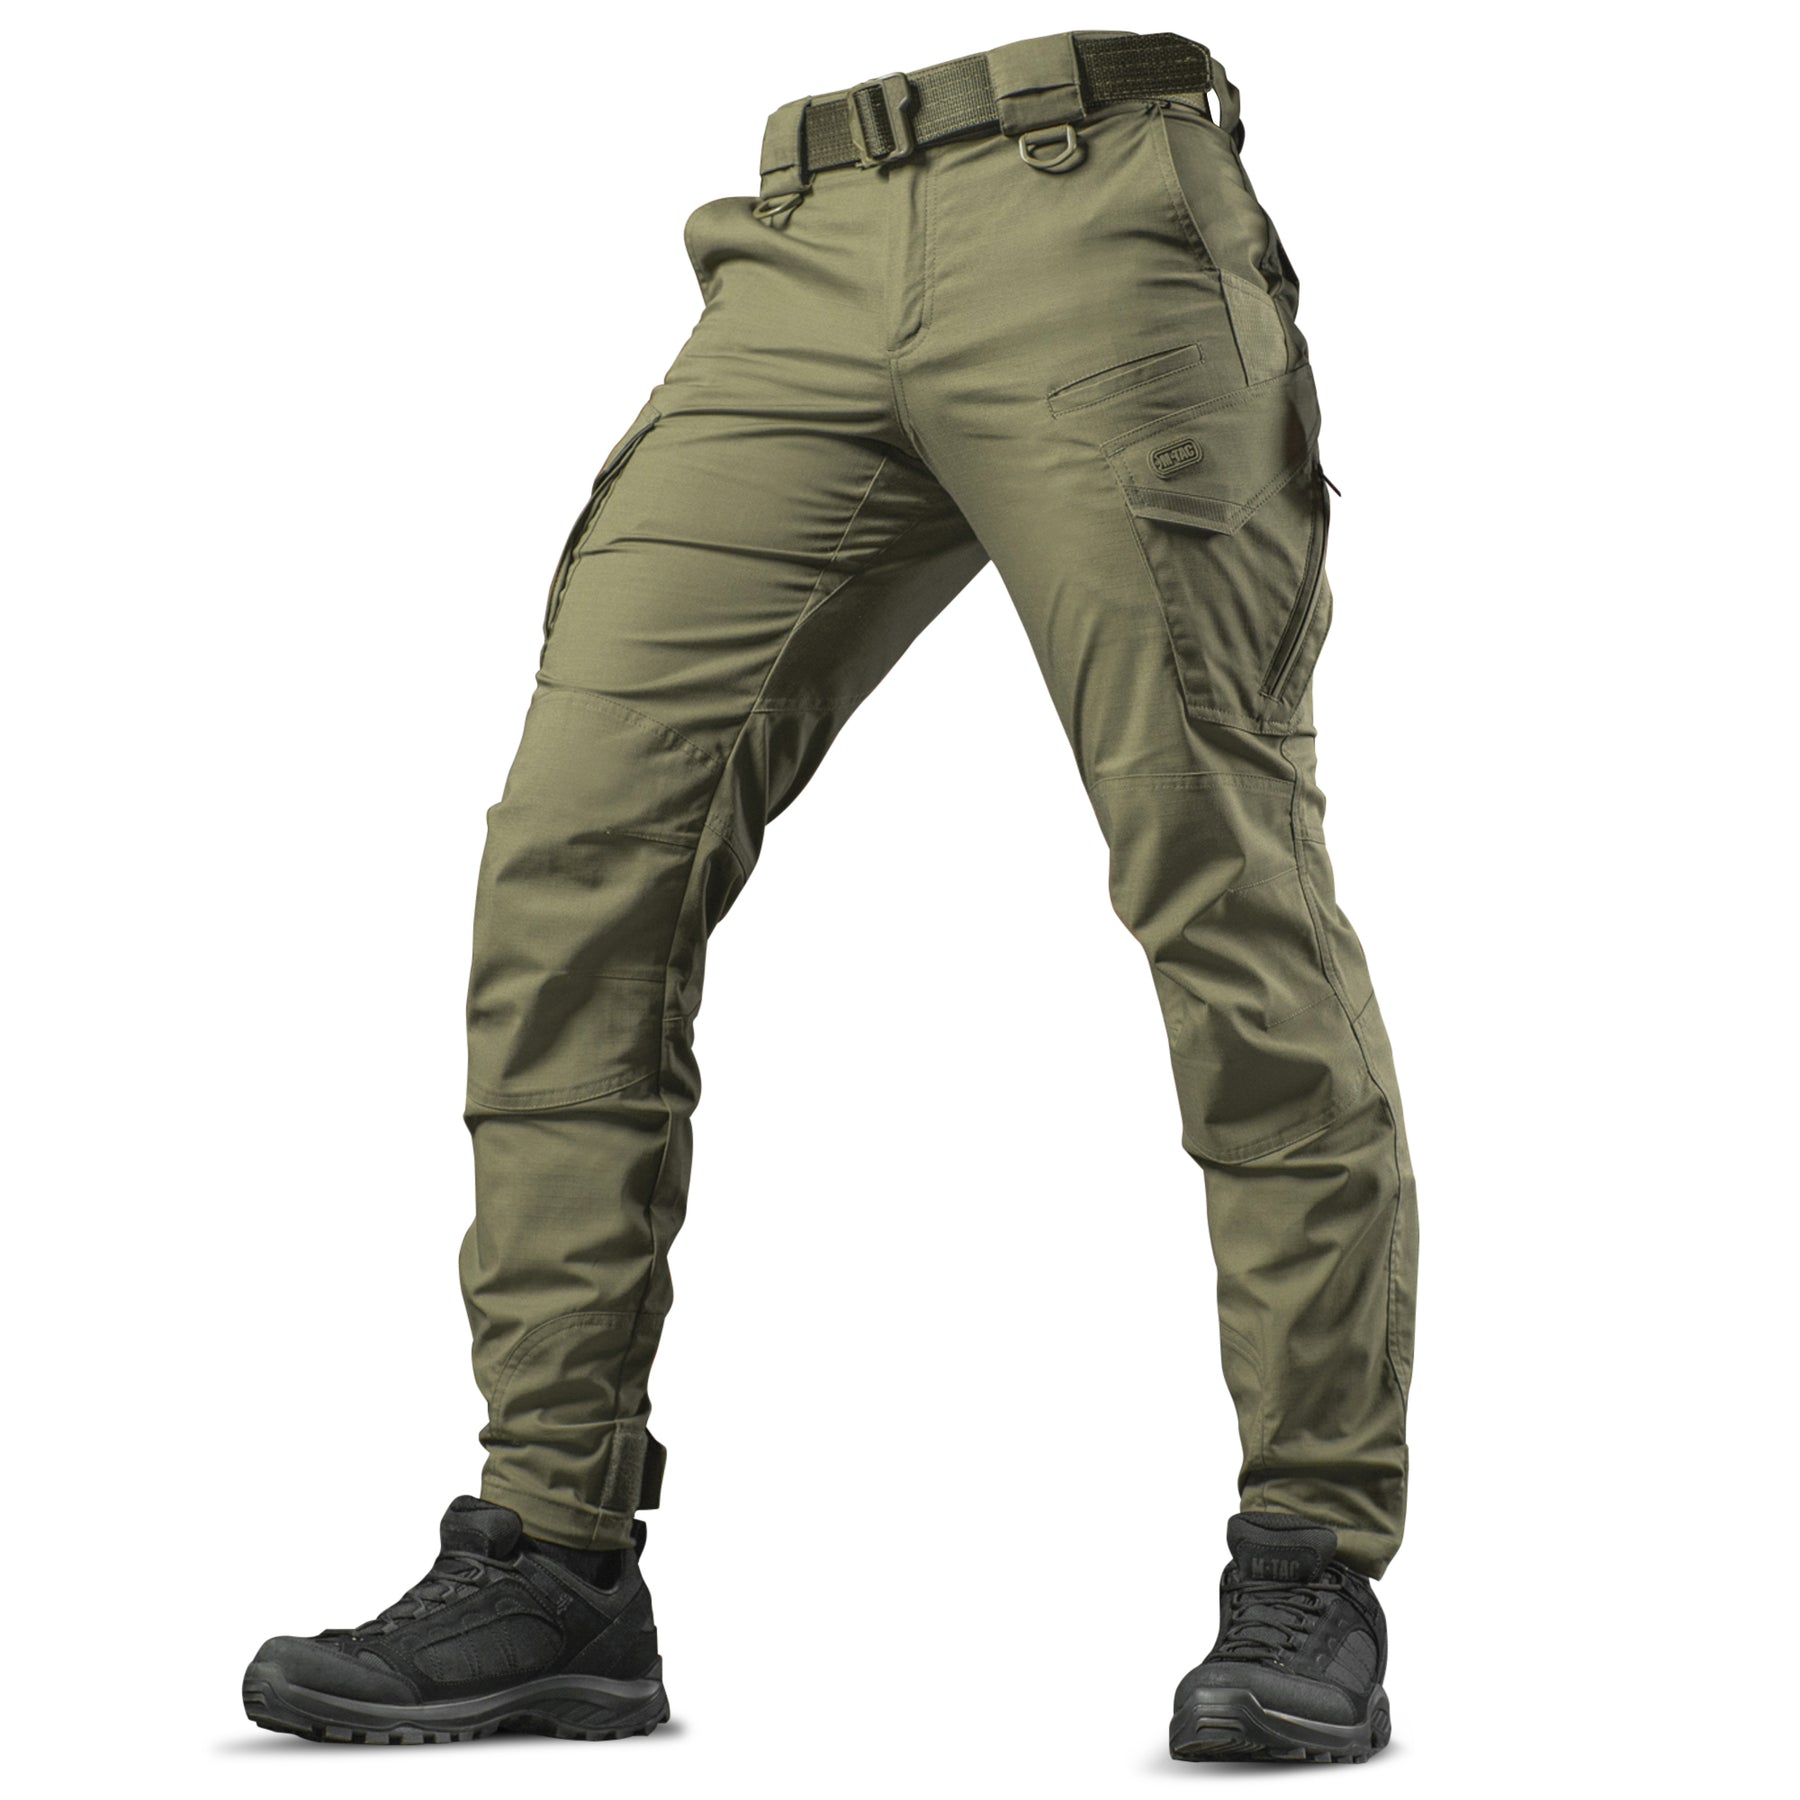 Wholesale Cargo Pants Products at Factory Prices from Manufacturers in  China, India, Korea, etc. | Global Sources